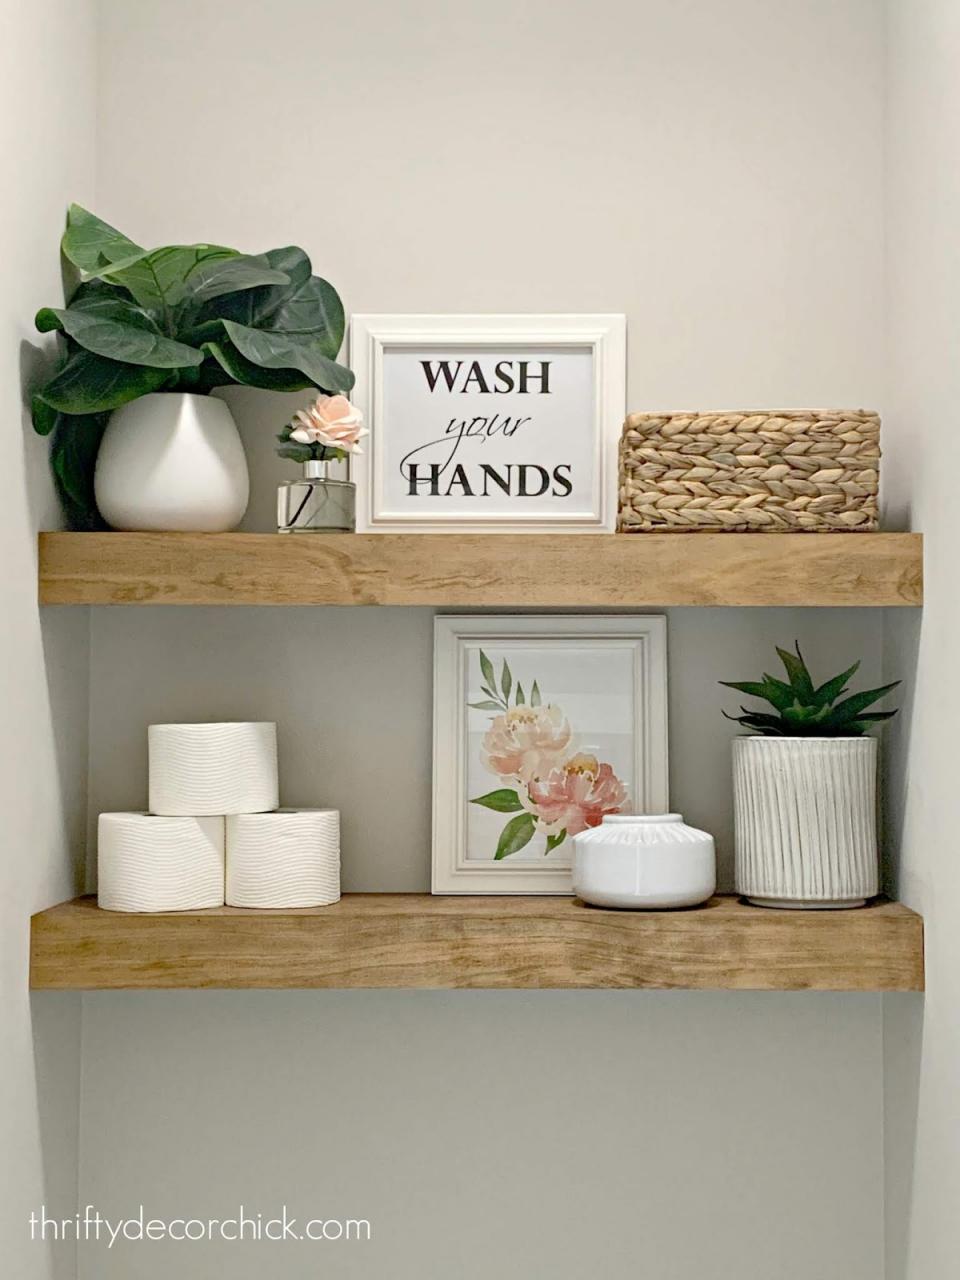 Let's build some quick floating shelves! Thrifty Decor Chick